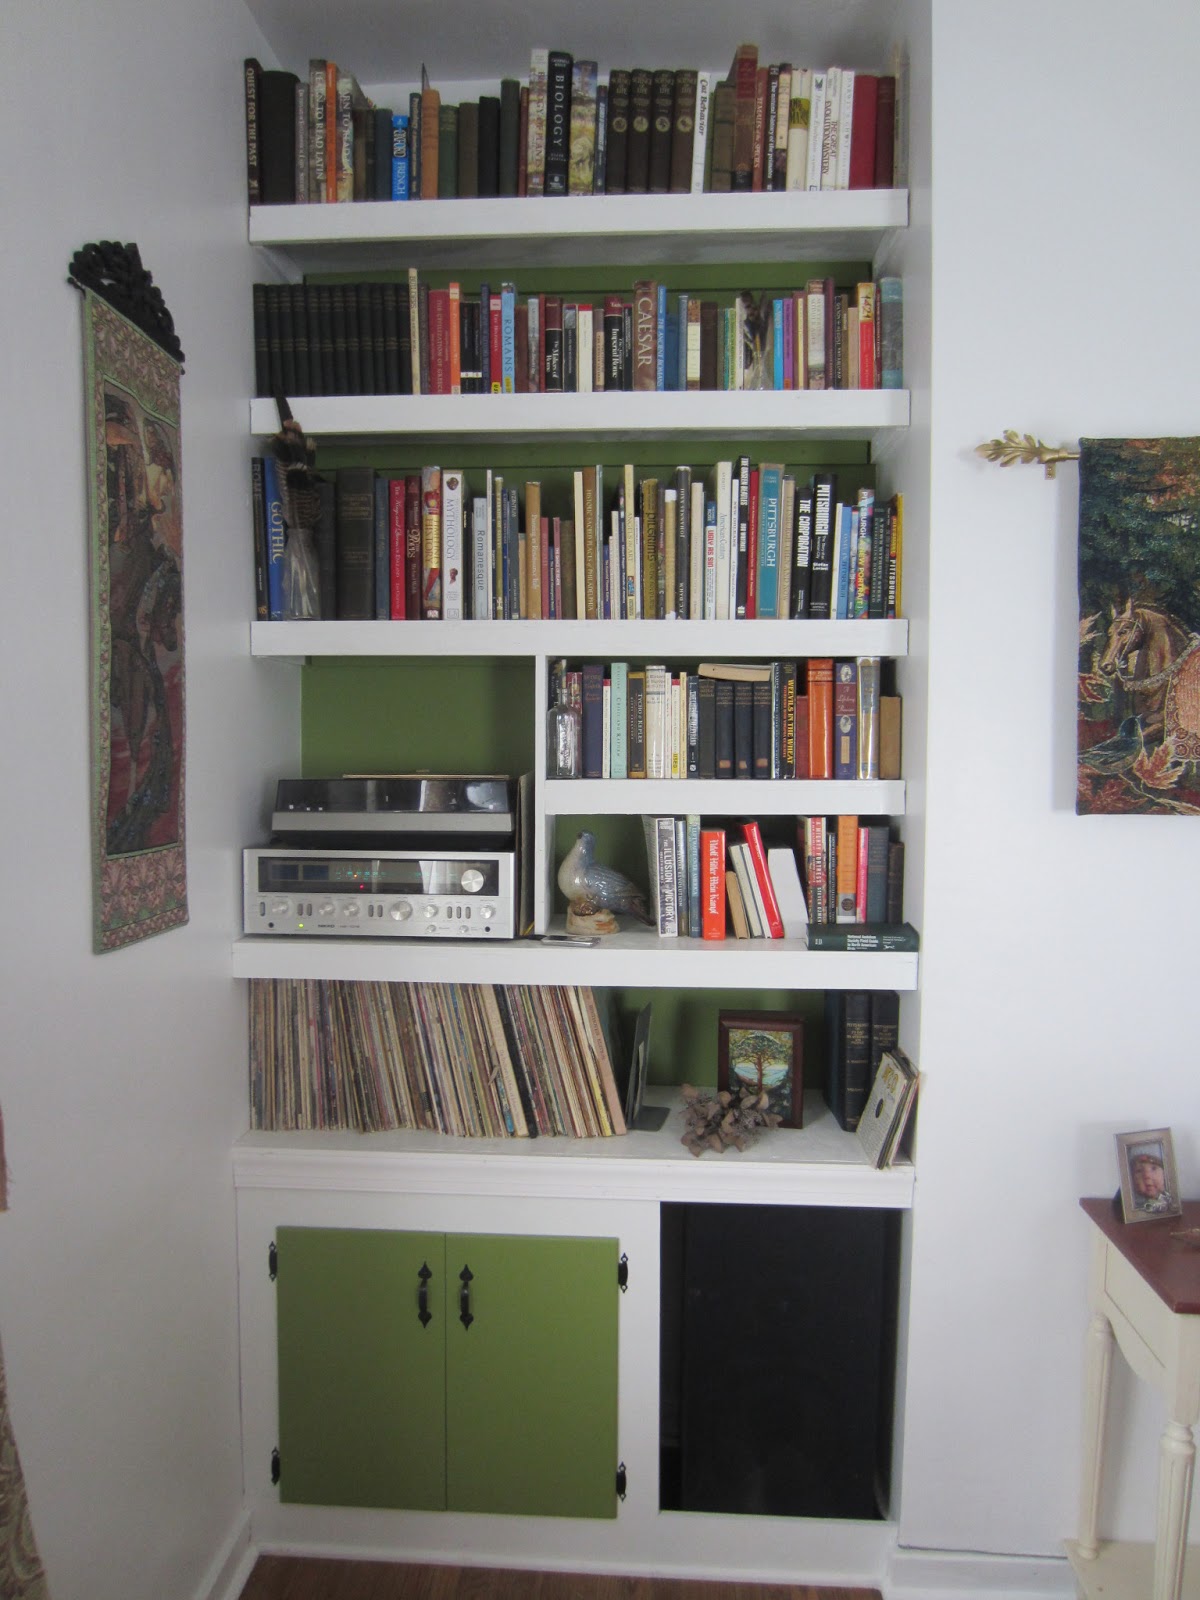 Splendor in the Home: Our Thrifty DIY Built-In Bookcases